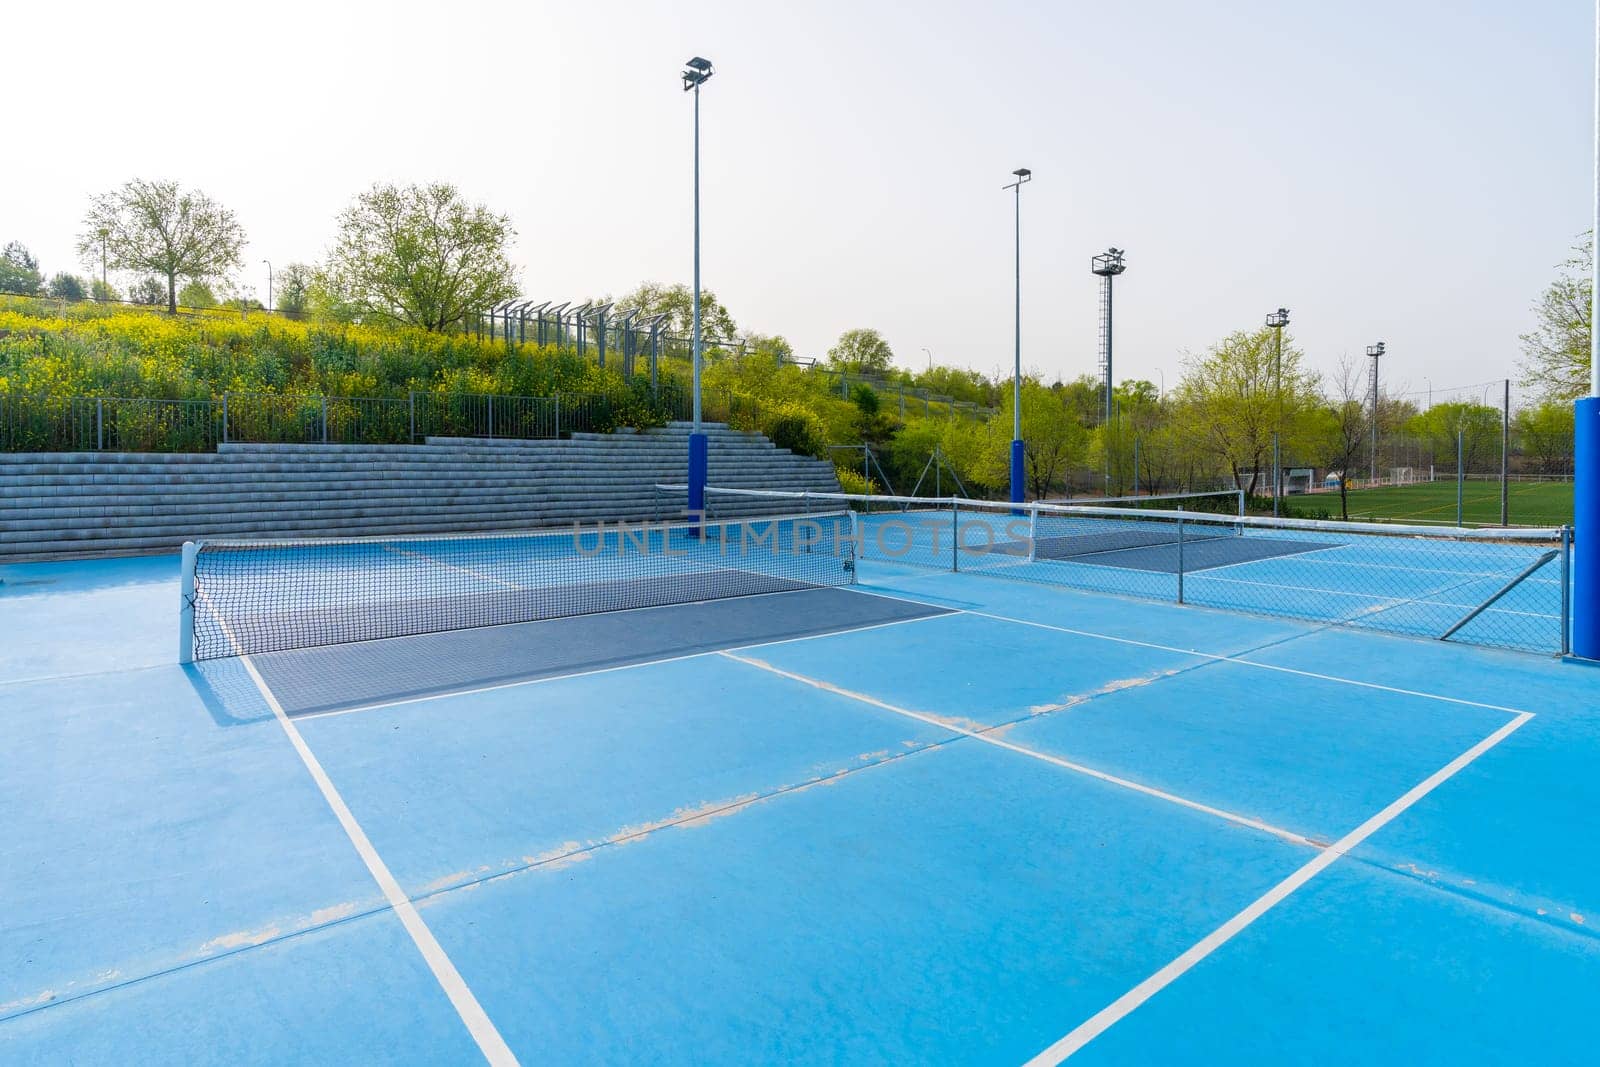 Empty new blue outdoors pickletball and tennis courts by Huizi